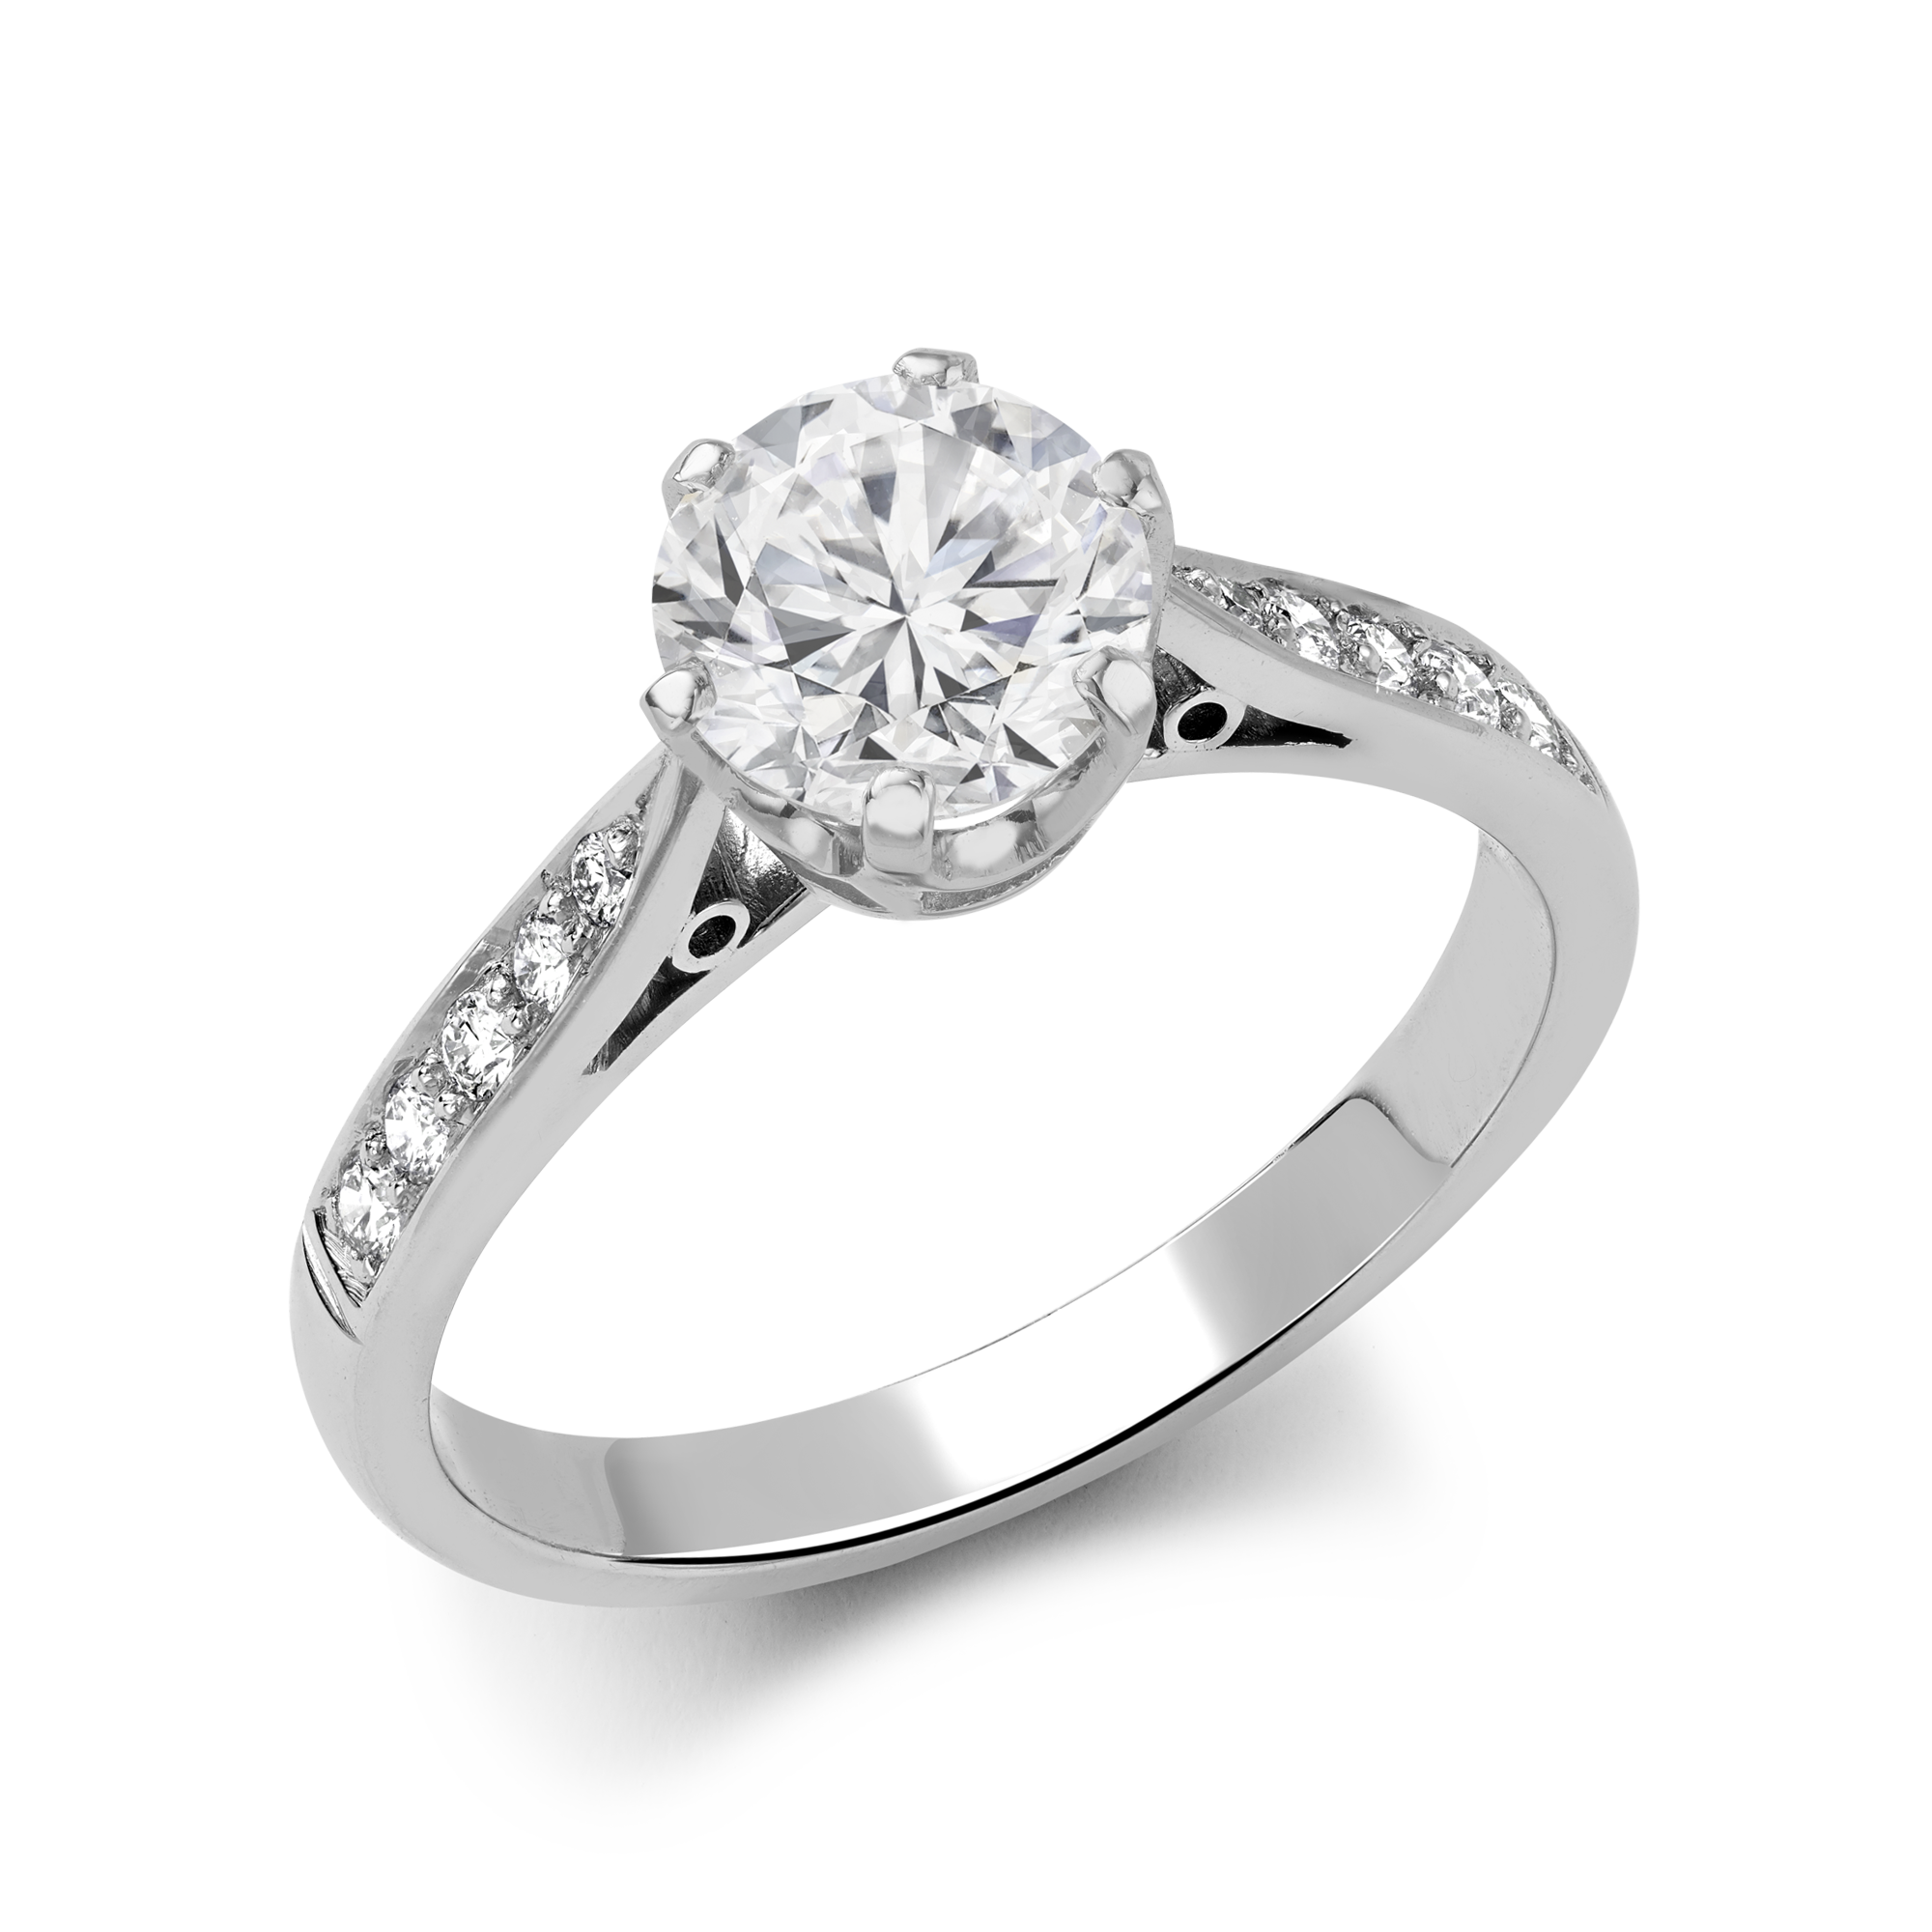 Antique Inspired 1.07ct Diamond Solitaire Ring Brilliant cut, Claw set_1